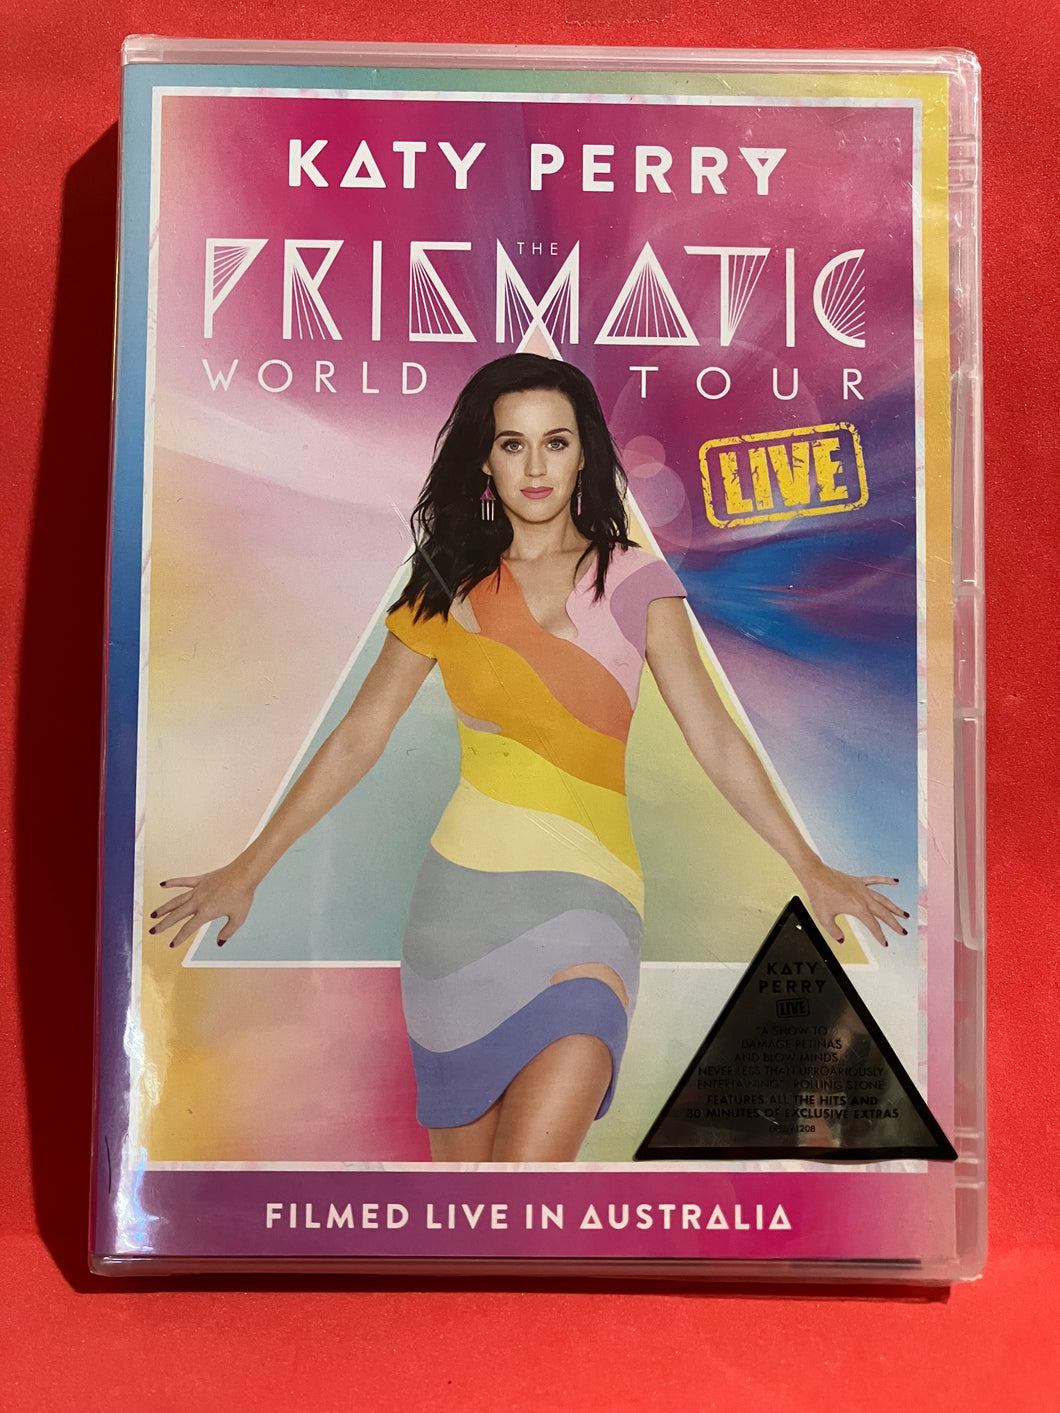 KATY PERRY - THE PRISMATIC WORLD TOUR LIVE - DVD (SEALED)